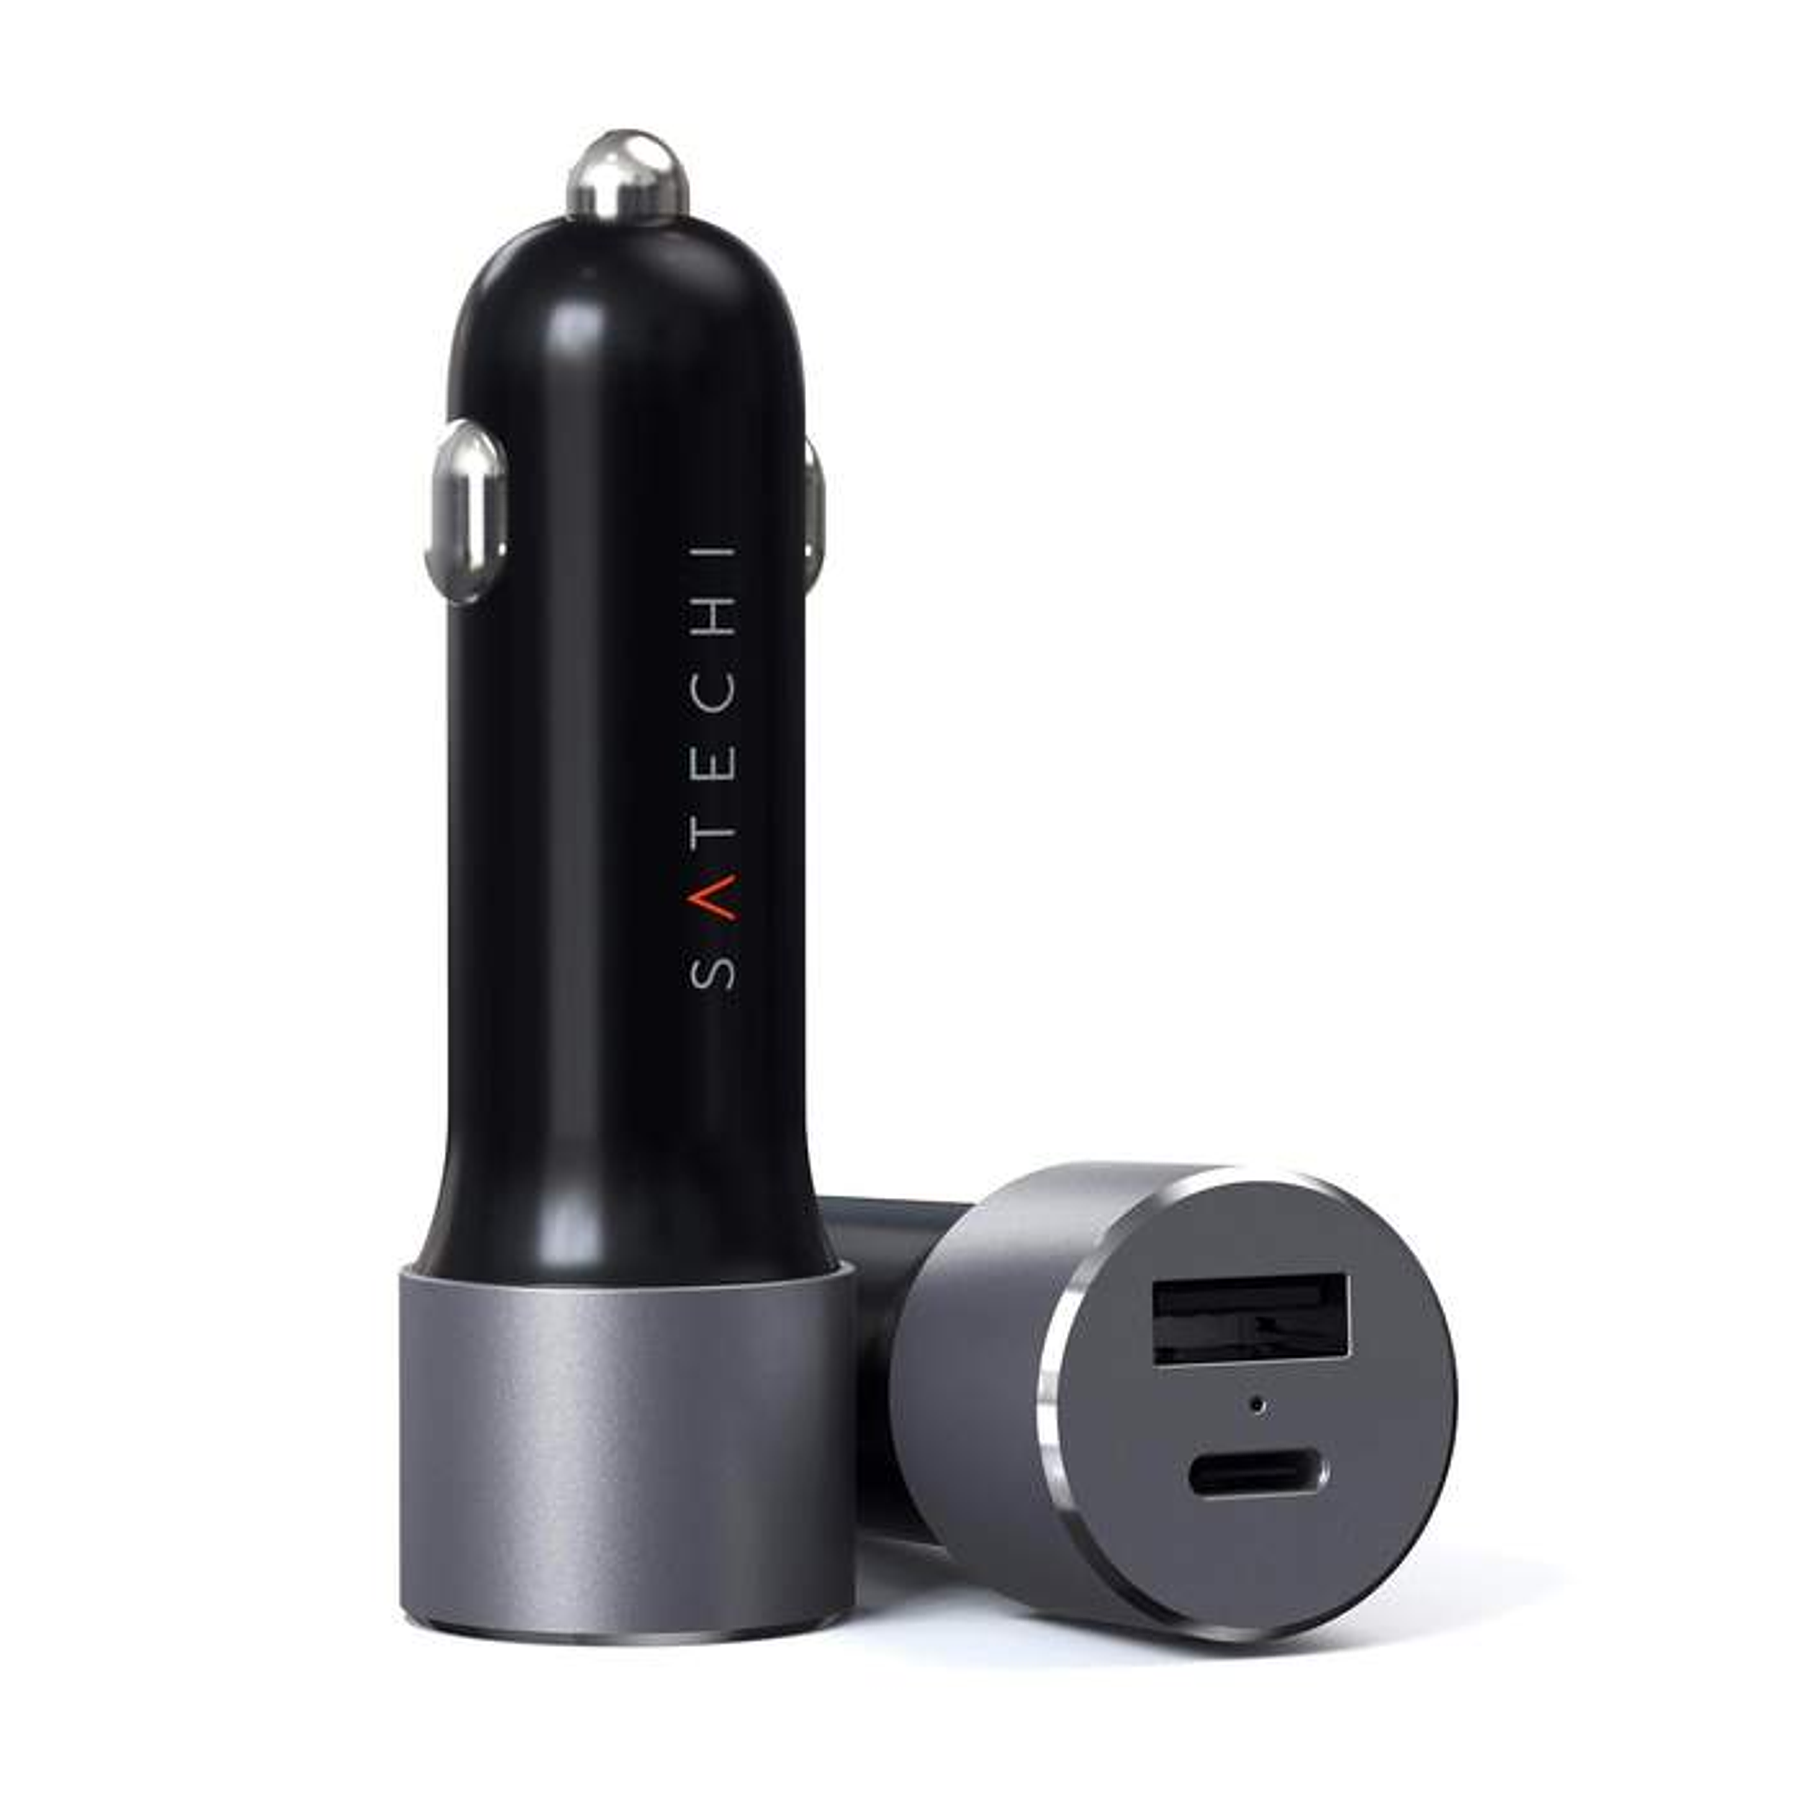 Satechi - 72W USB-C PD Car Charger (space grey)